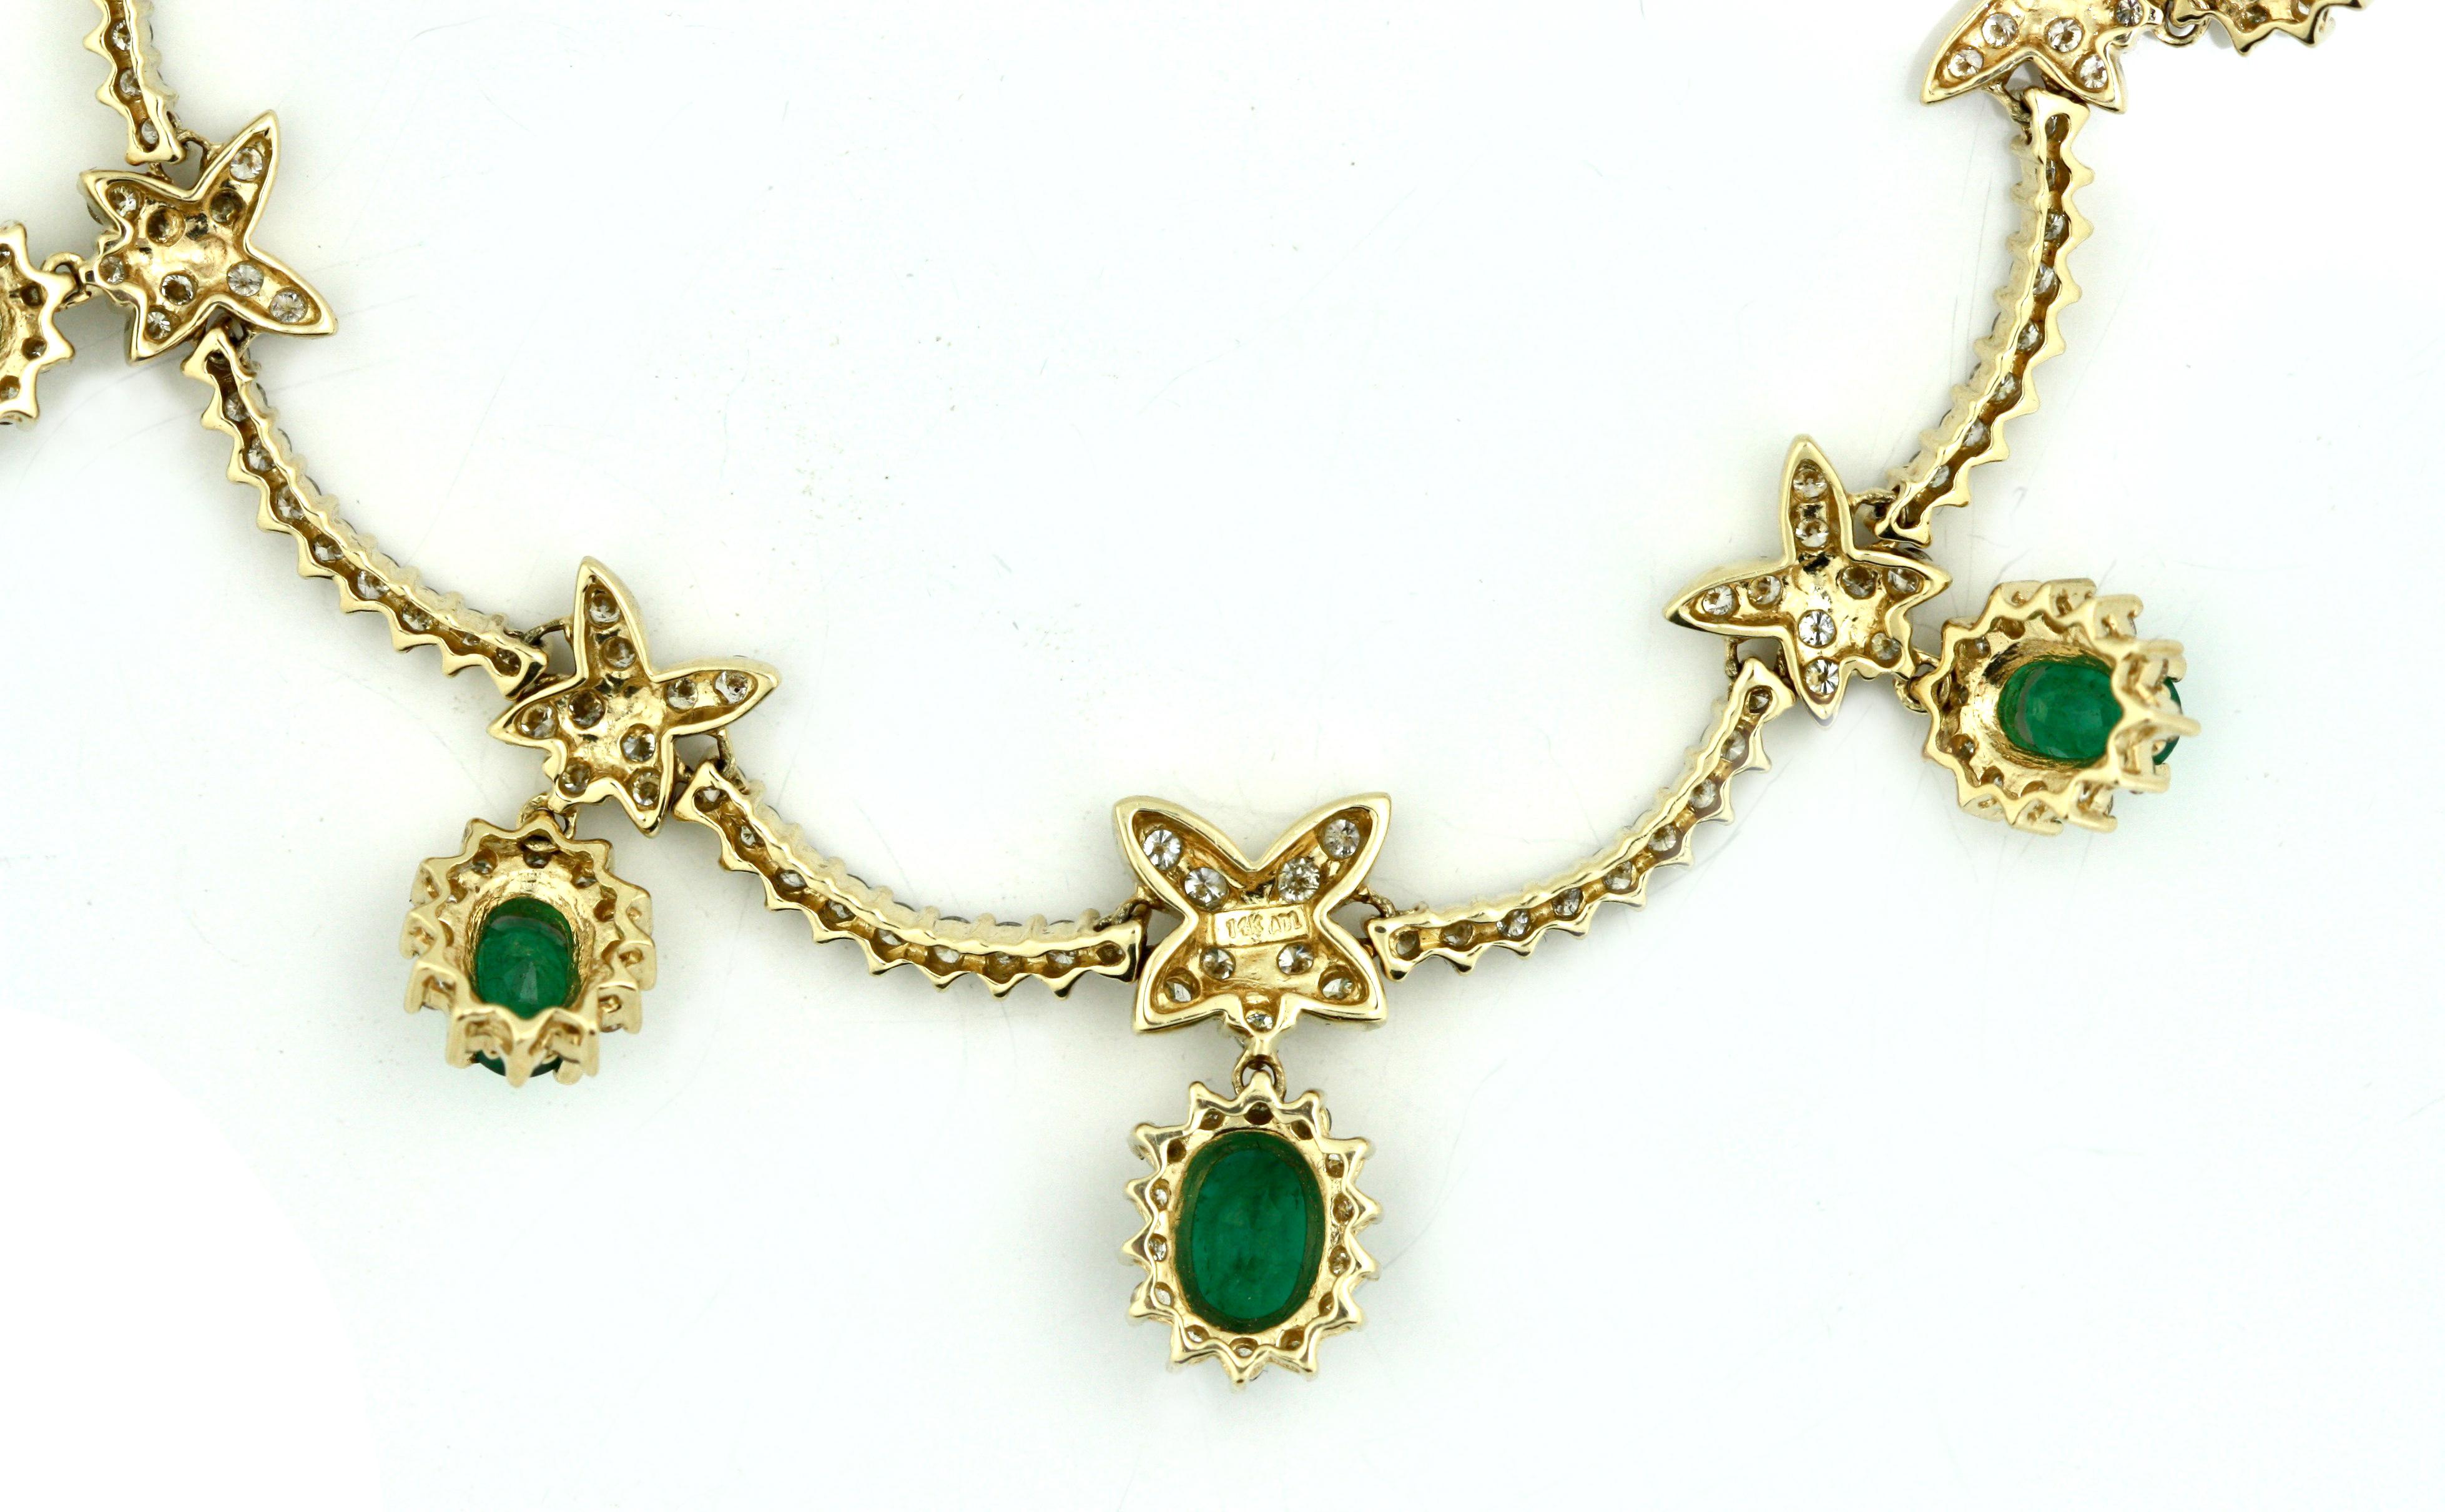 Emerald and Diamond Necklace Mounted in 14 Karat Gold 1